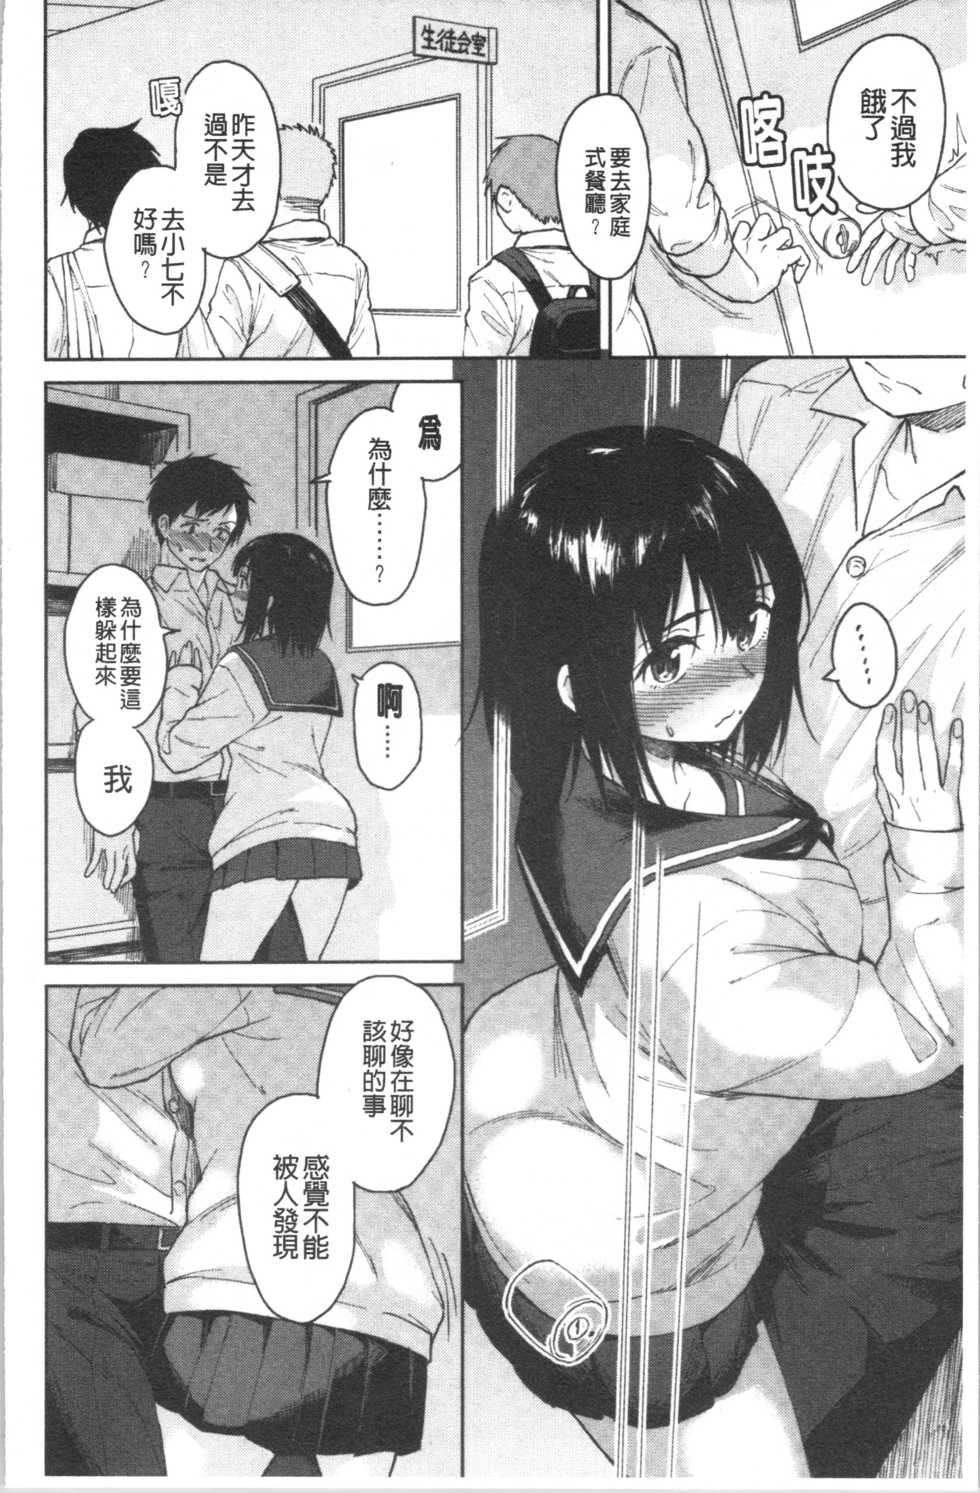 [Pennel] Houkago wa Bouken no Jikan - Time for libido after school [Chinese] - Page 14